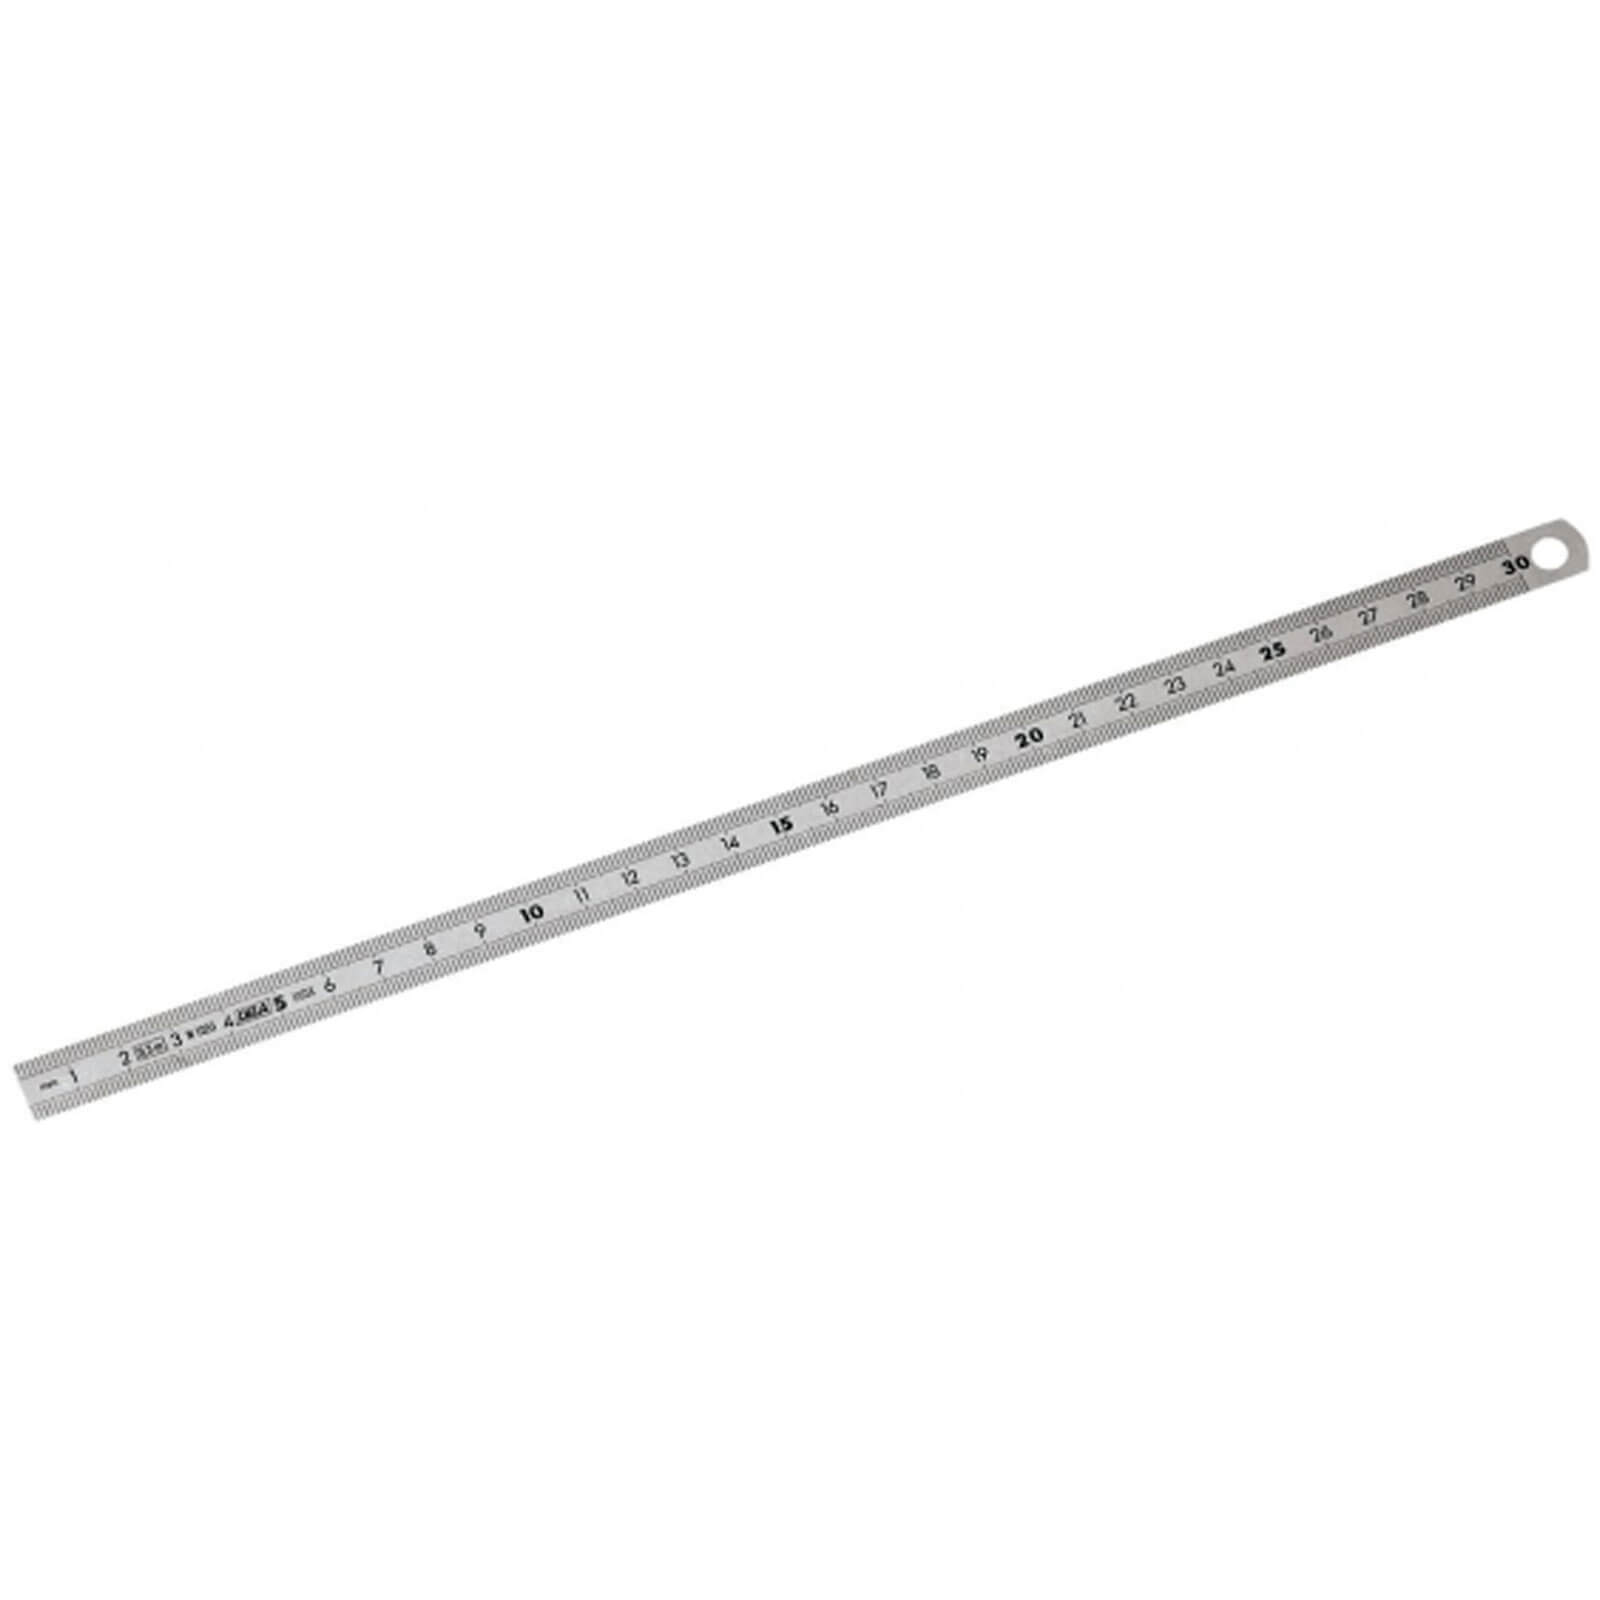 Image of Facom DELA.1051 Metric Double Sided Stainless Steel Rule 20" / 500mm